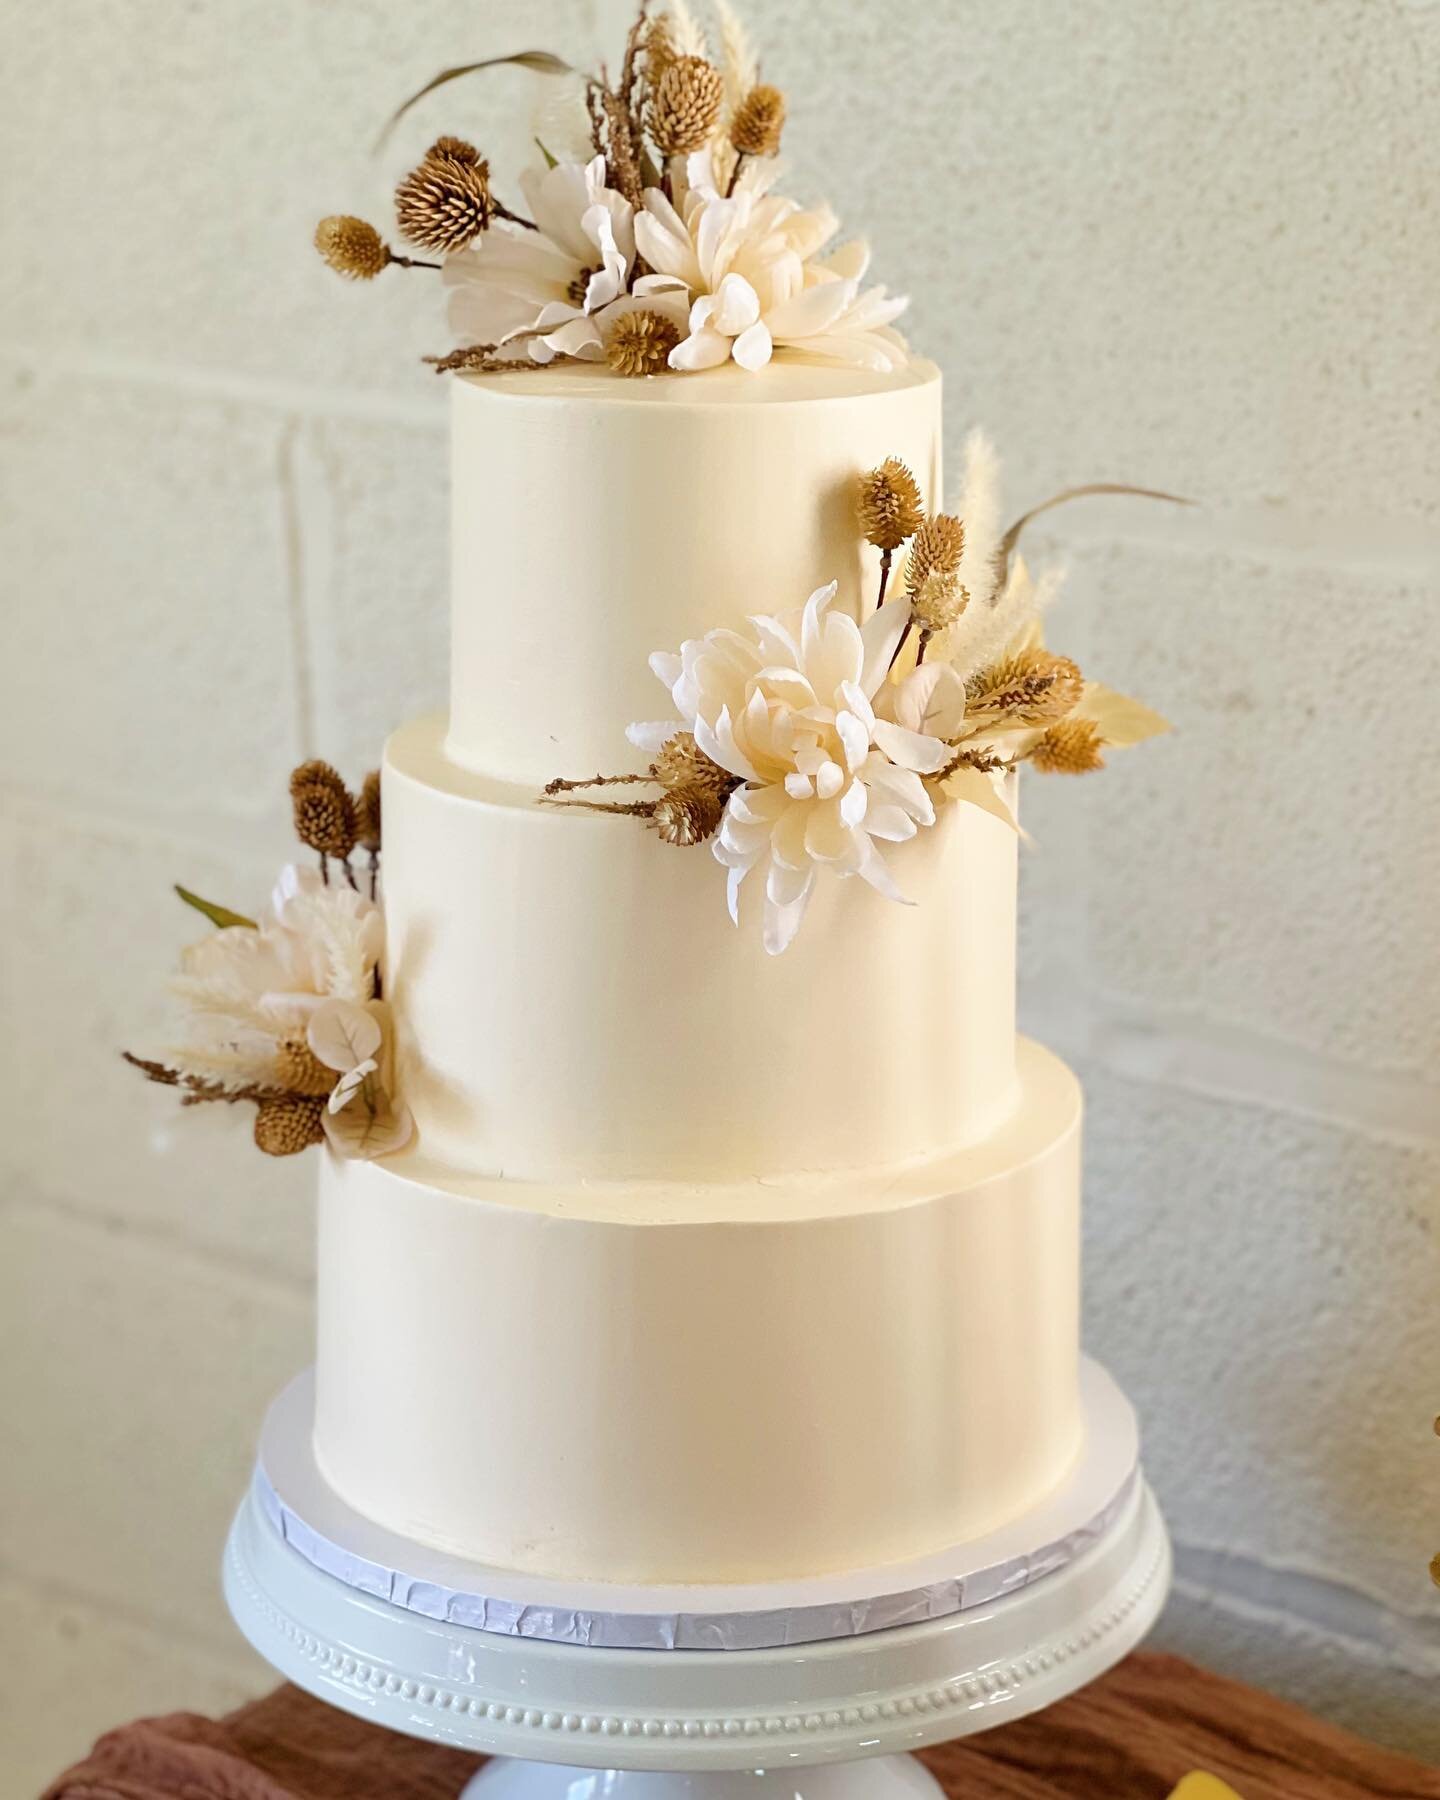 Loved how this neutral boho beauty came together for Alex &amp; Jared&rsquo;s wedding this past Saturday! 

#bohowedding #bohoweddingcake #roanoekva #virginiawedding #virginiaweddingcakes #bohobride #bohovibes #bohostyle #virginabakery #virginiaweddi